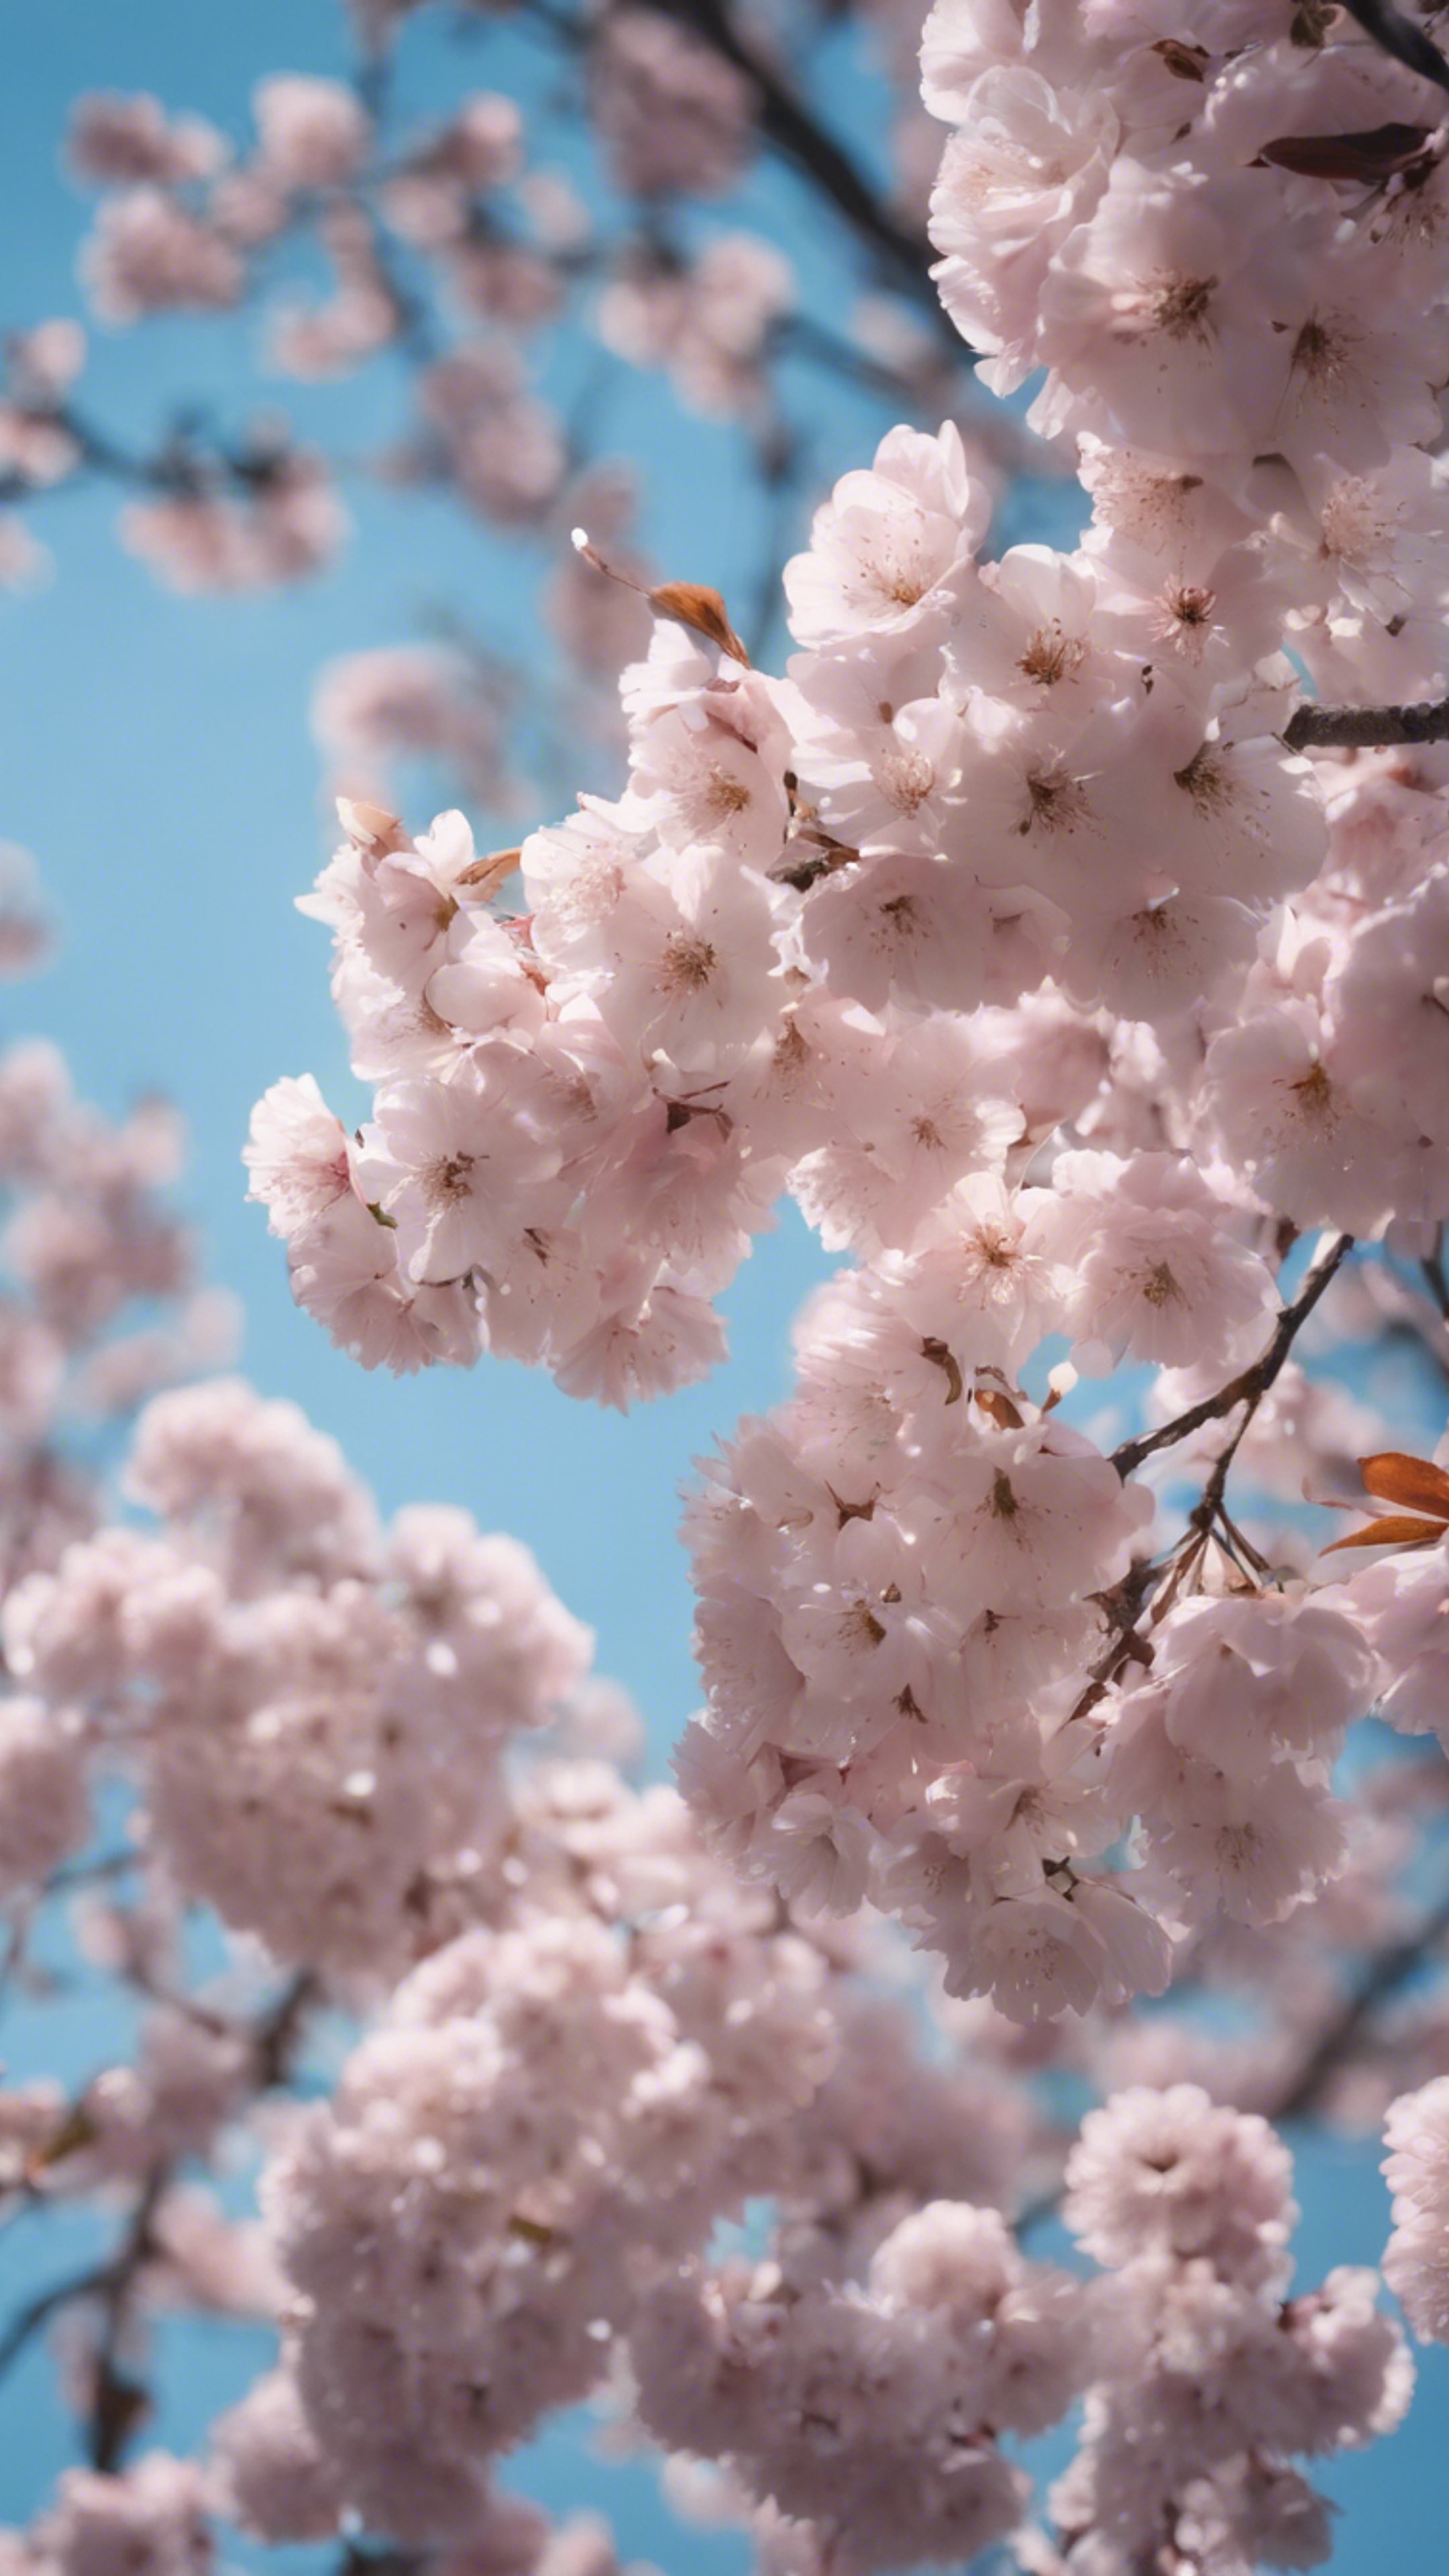 A Sakura tree in full bloom during springtime with a clear blue sky in the background.壁紙[fe771d7a91f341c490e6]